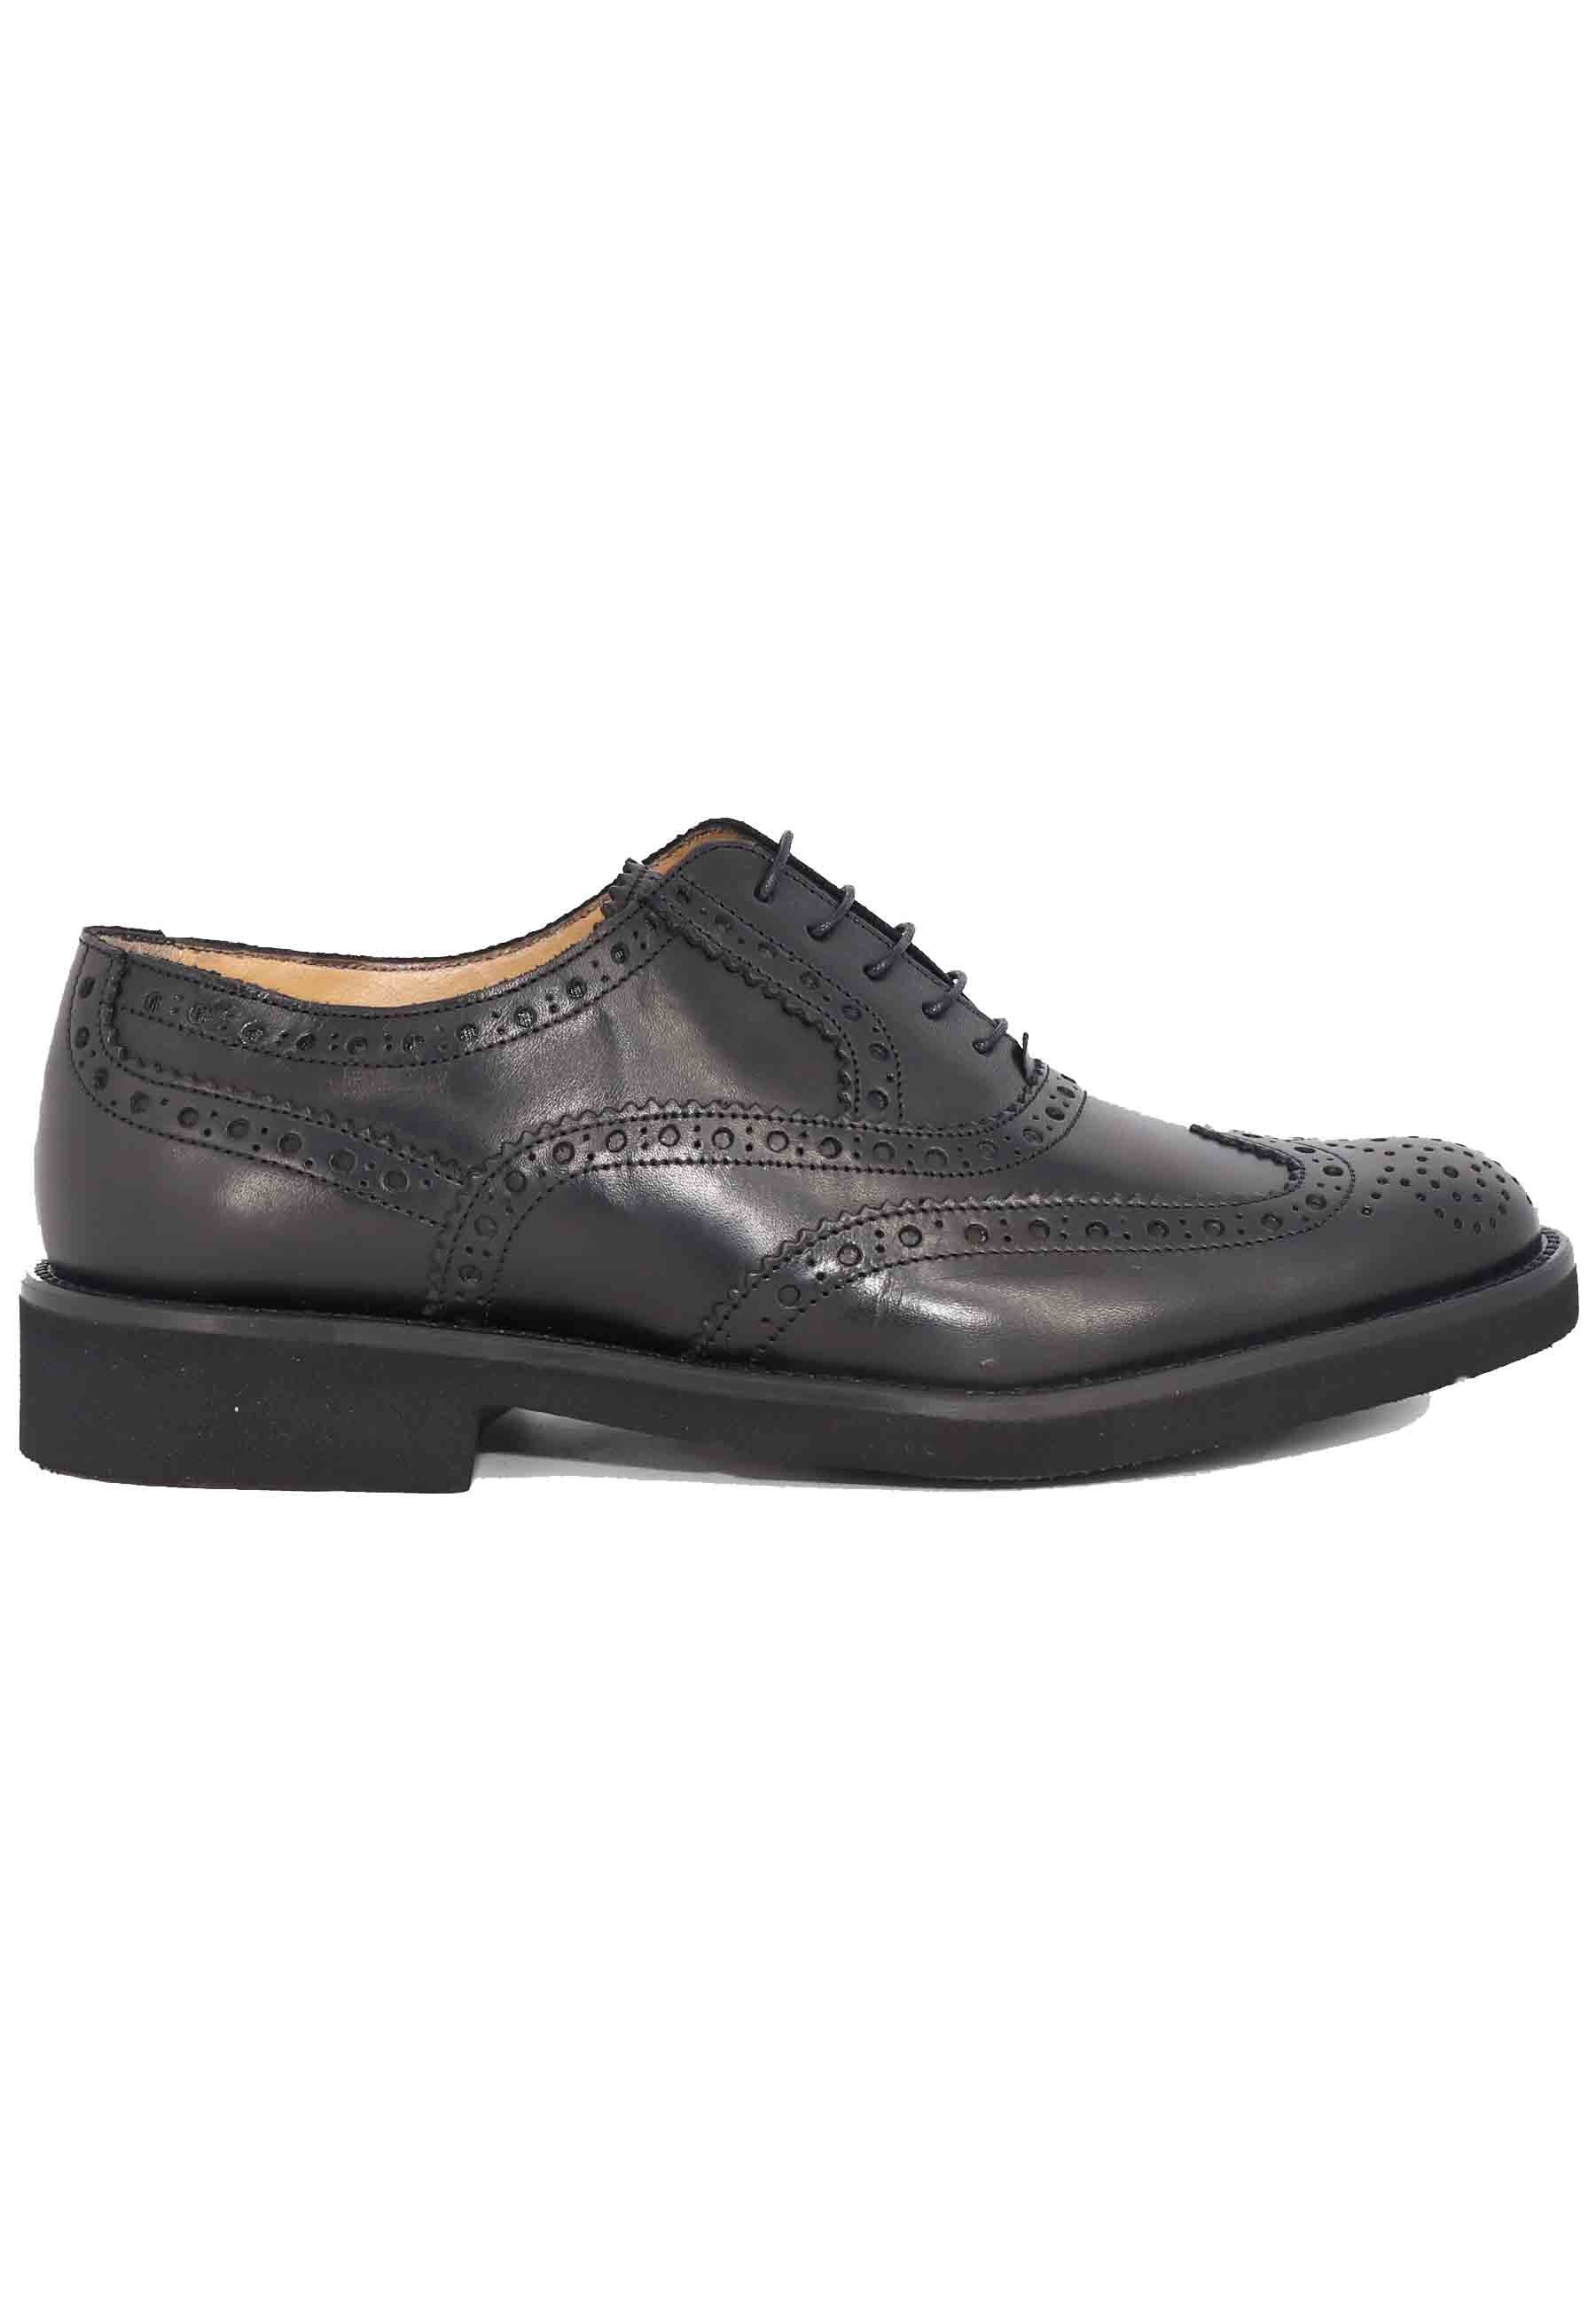 Men's lace-ups in black leather with English stitching and ultra-light rubber sole